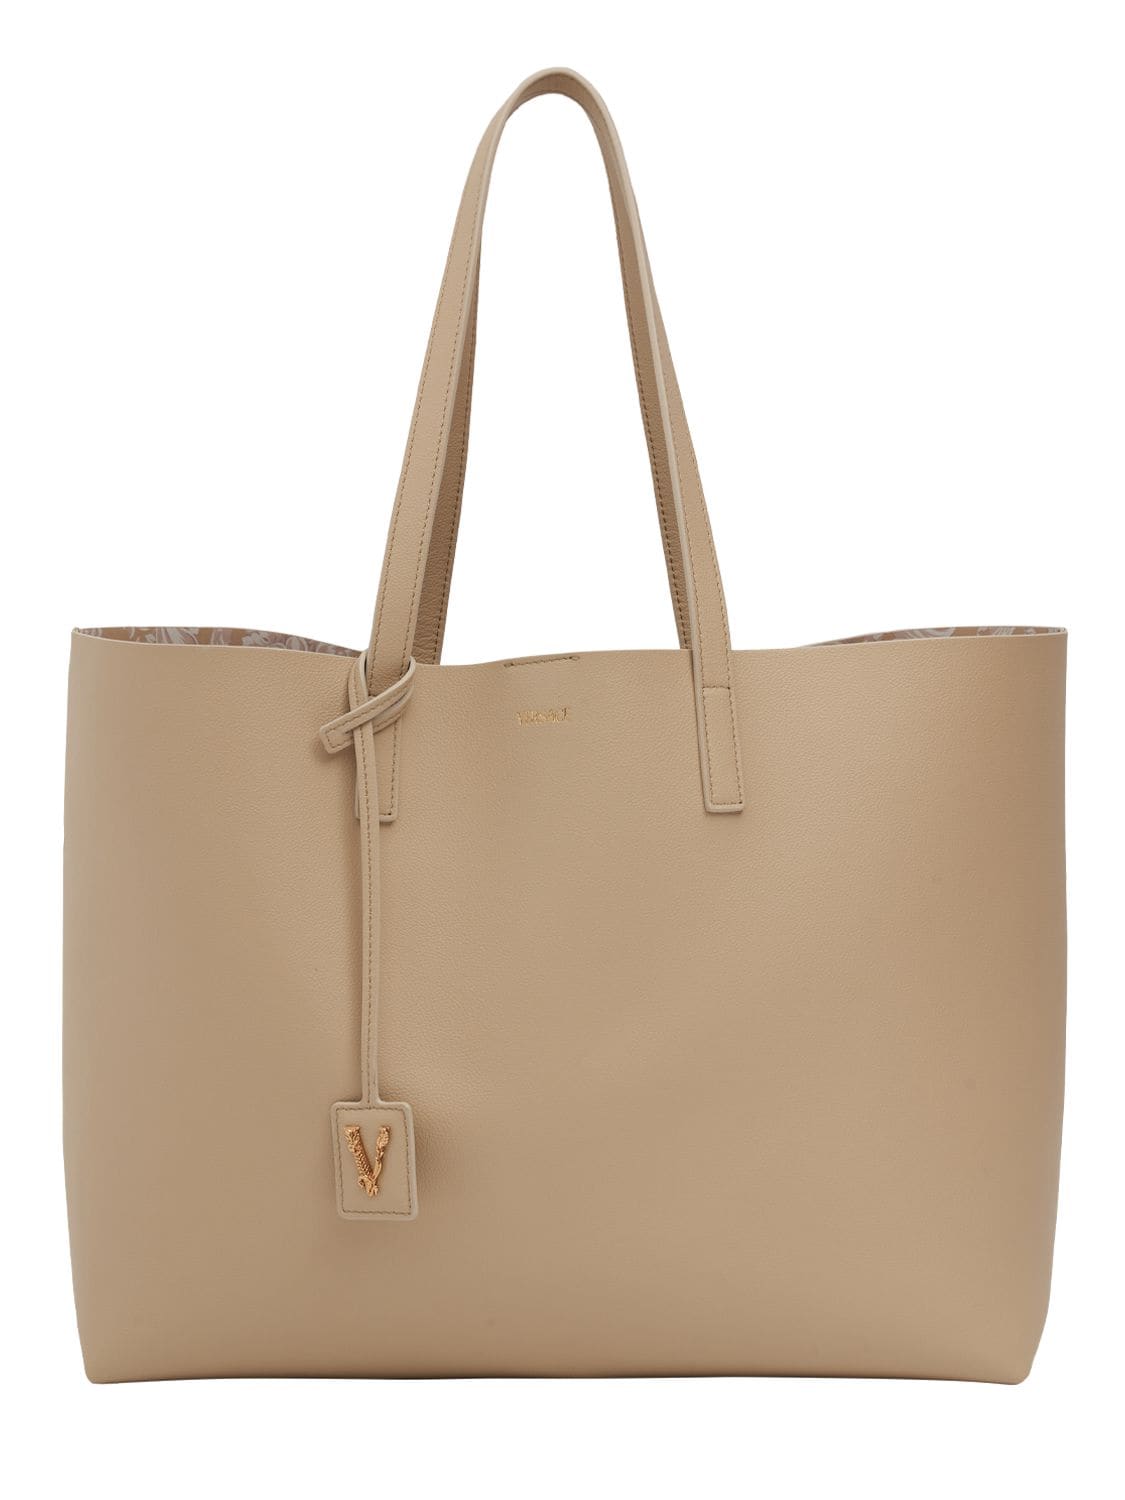 Image of Leather Tote Bag